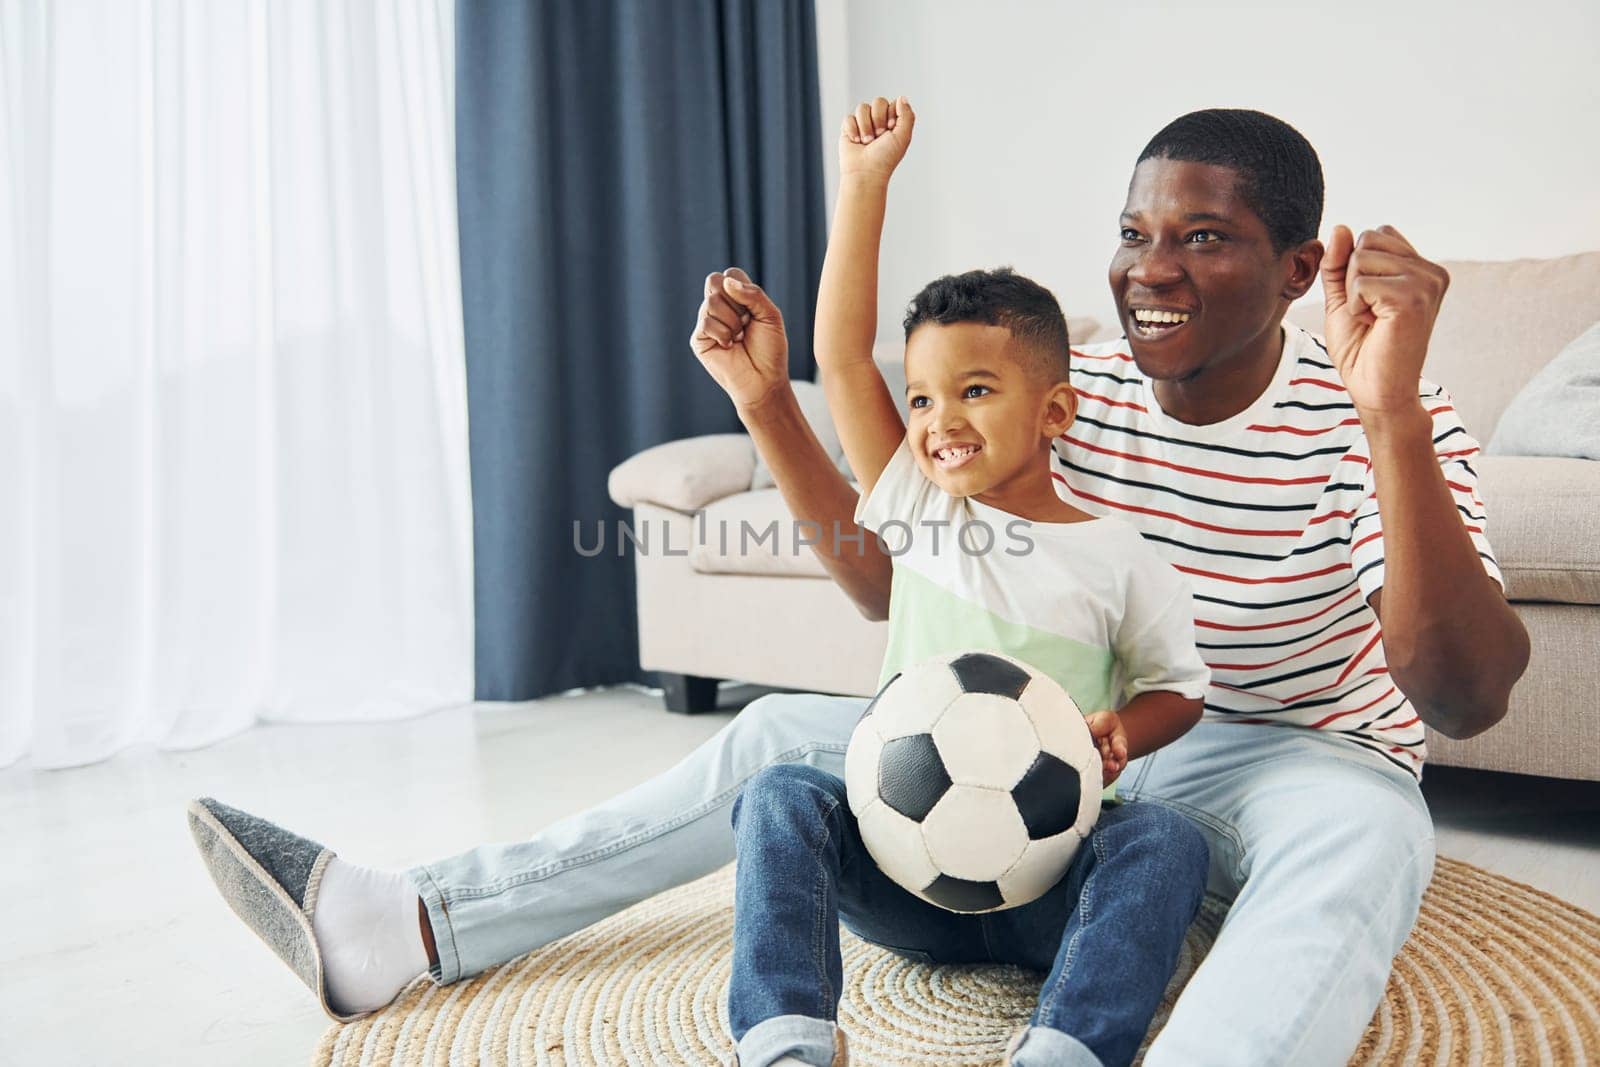 With soccer ball. African american father with his young son at home.